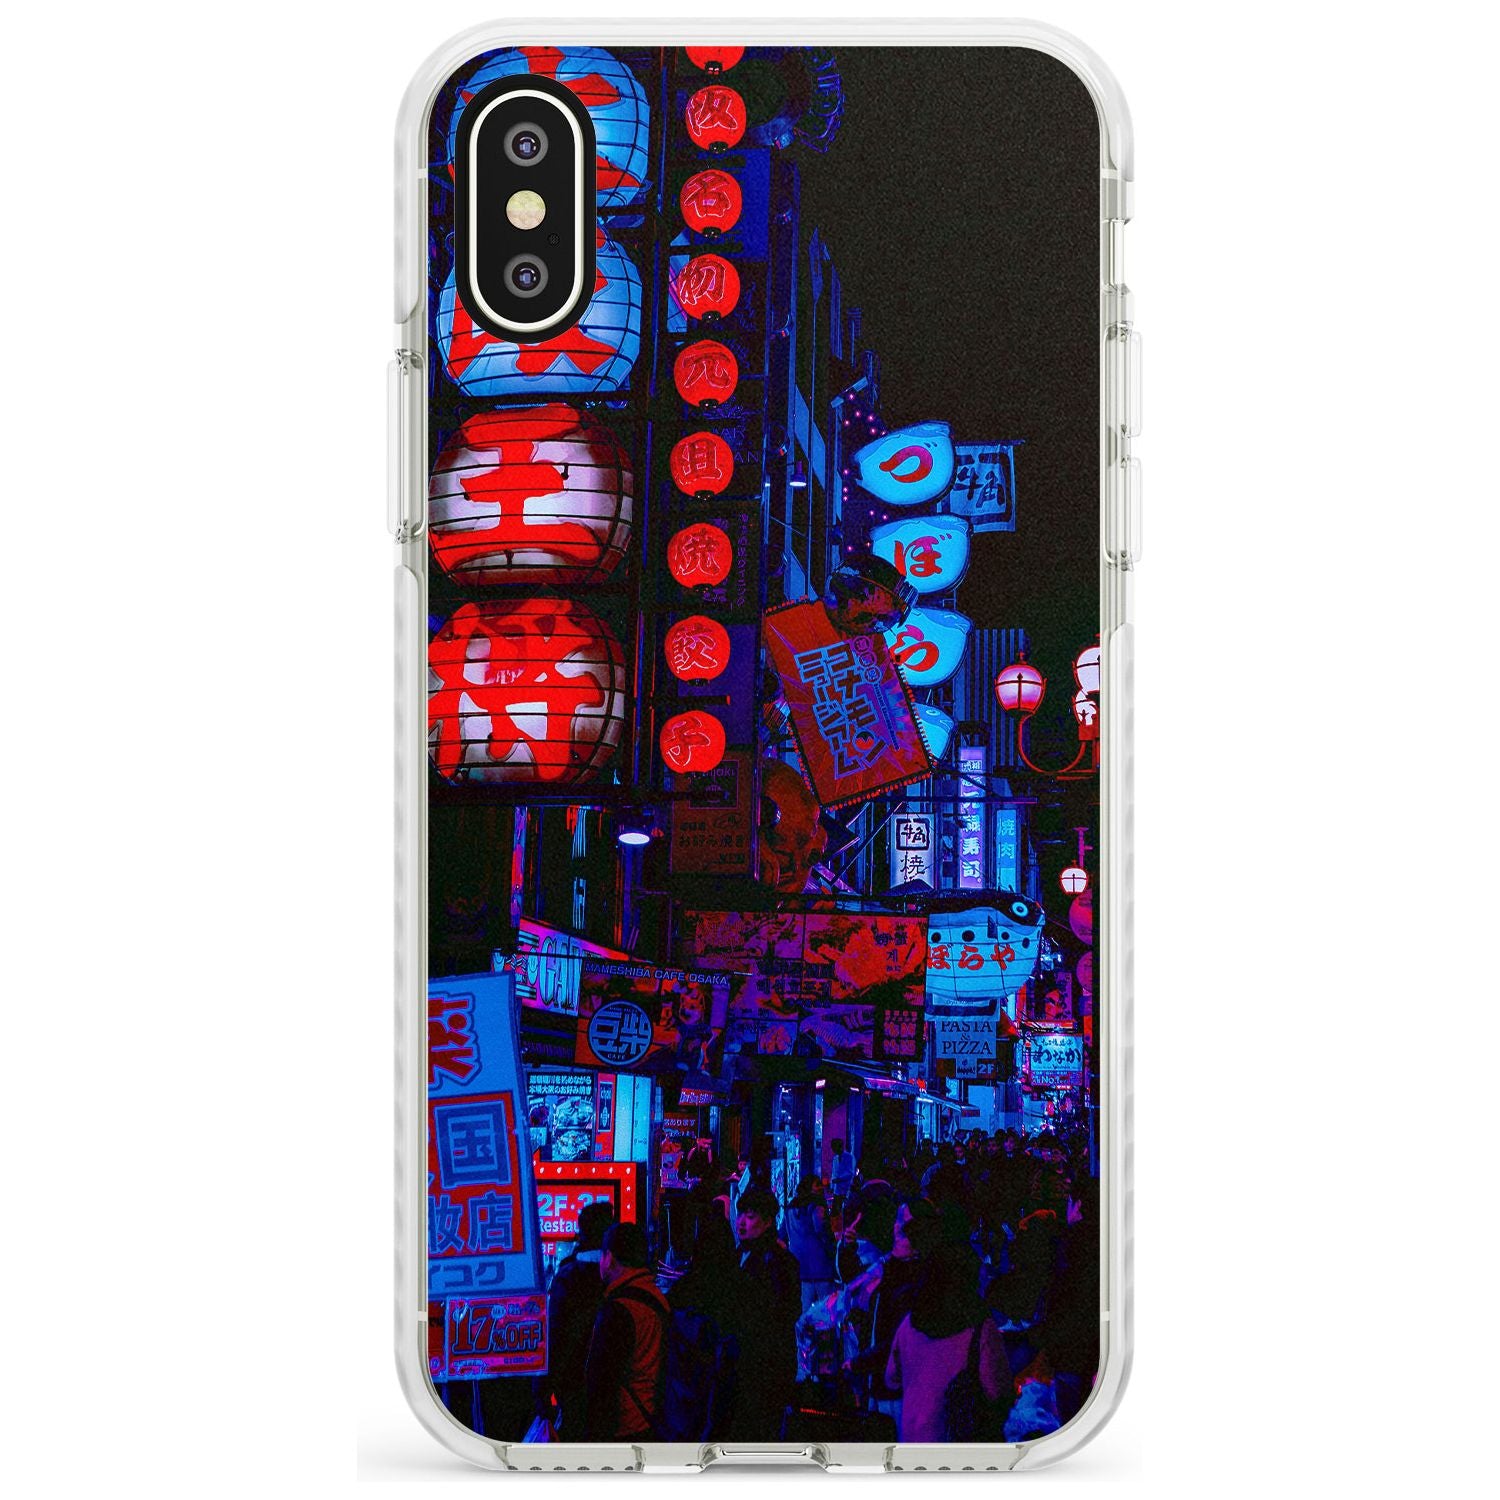 Red & Turquoise - Neon Cities Photographs Impact Phone Case for iPhone X XS Max XR